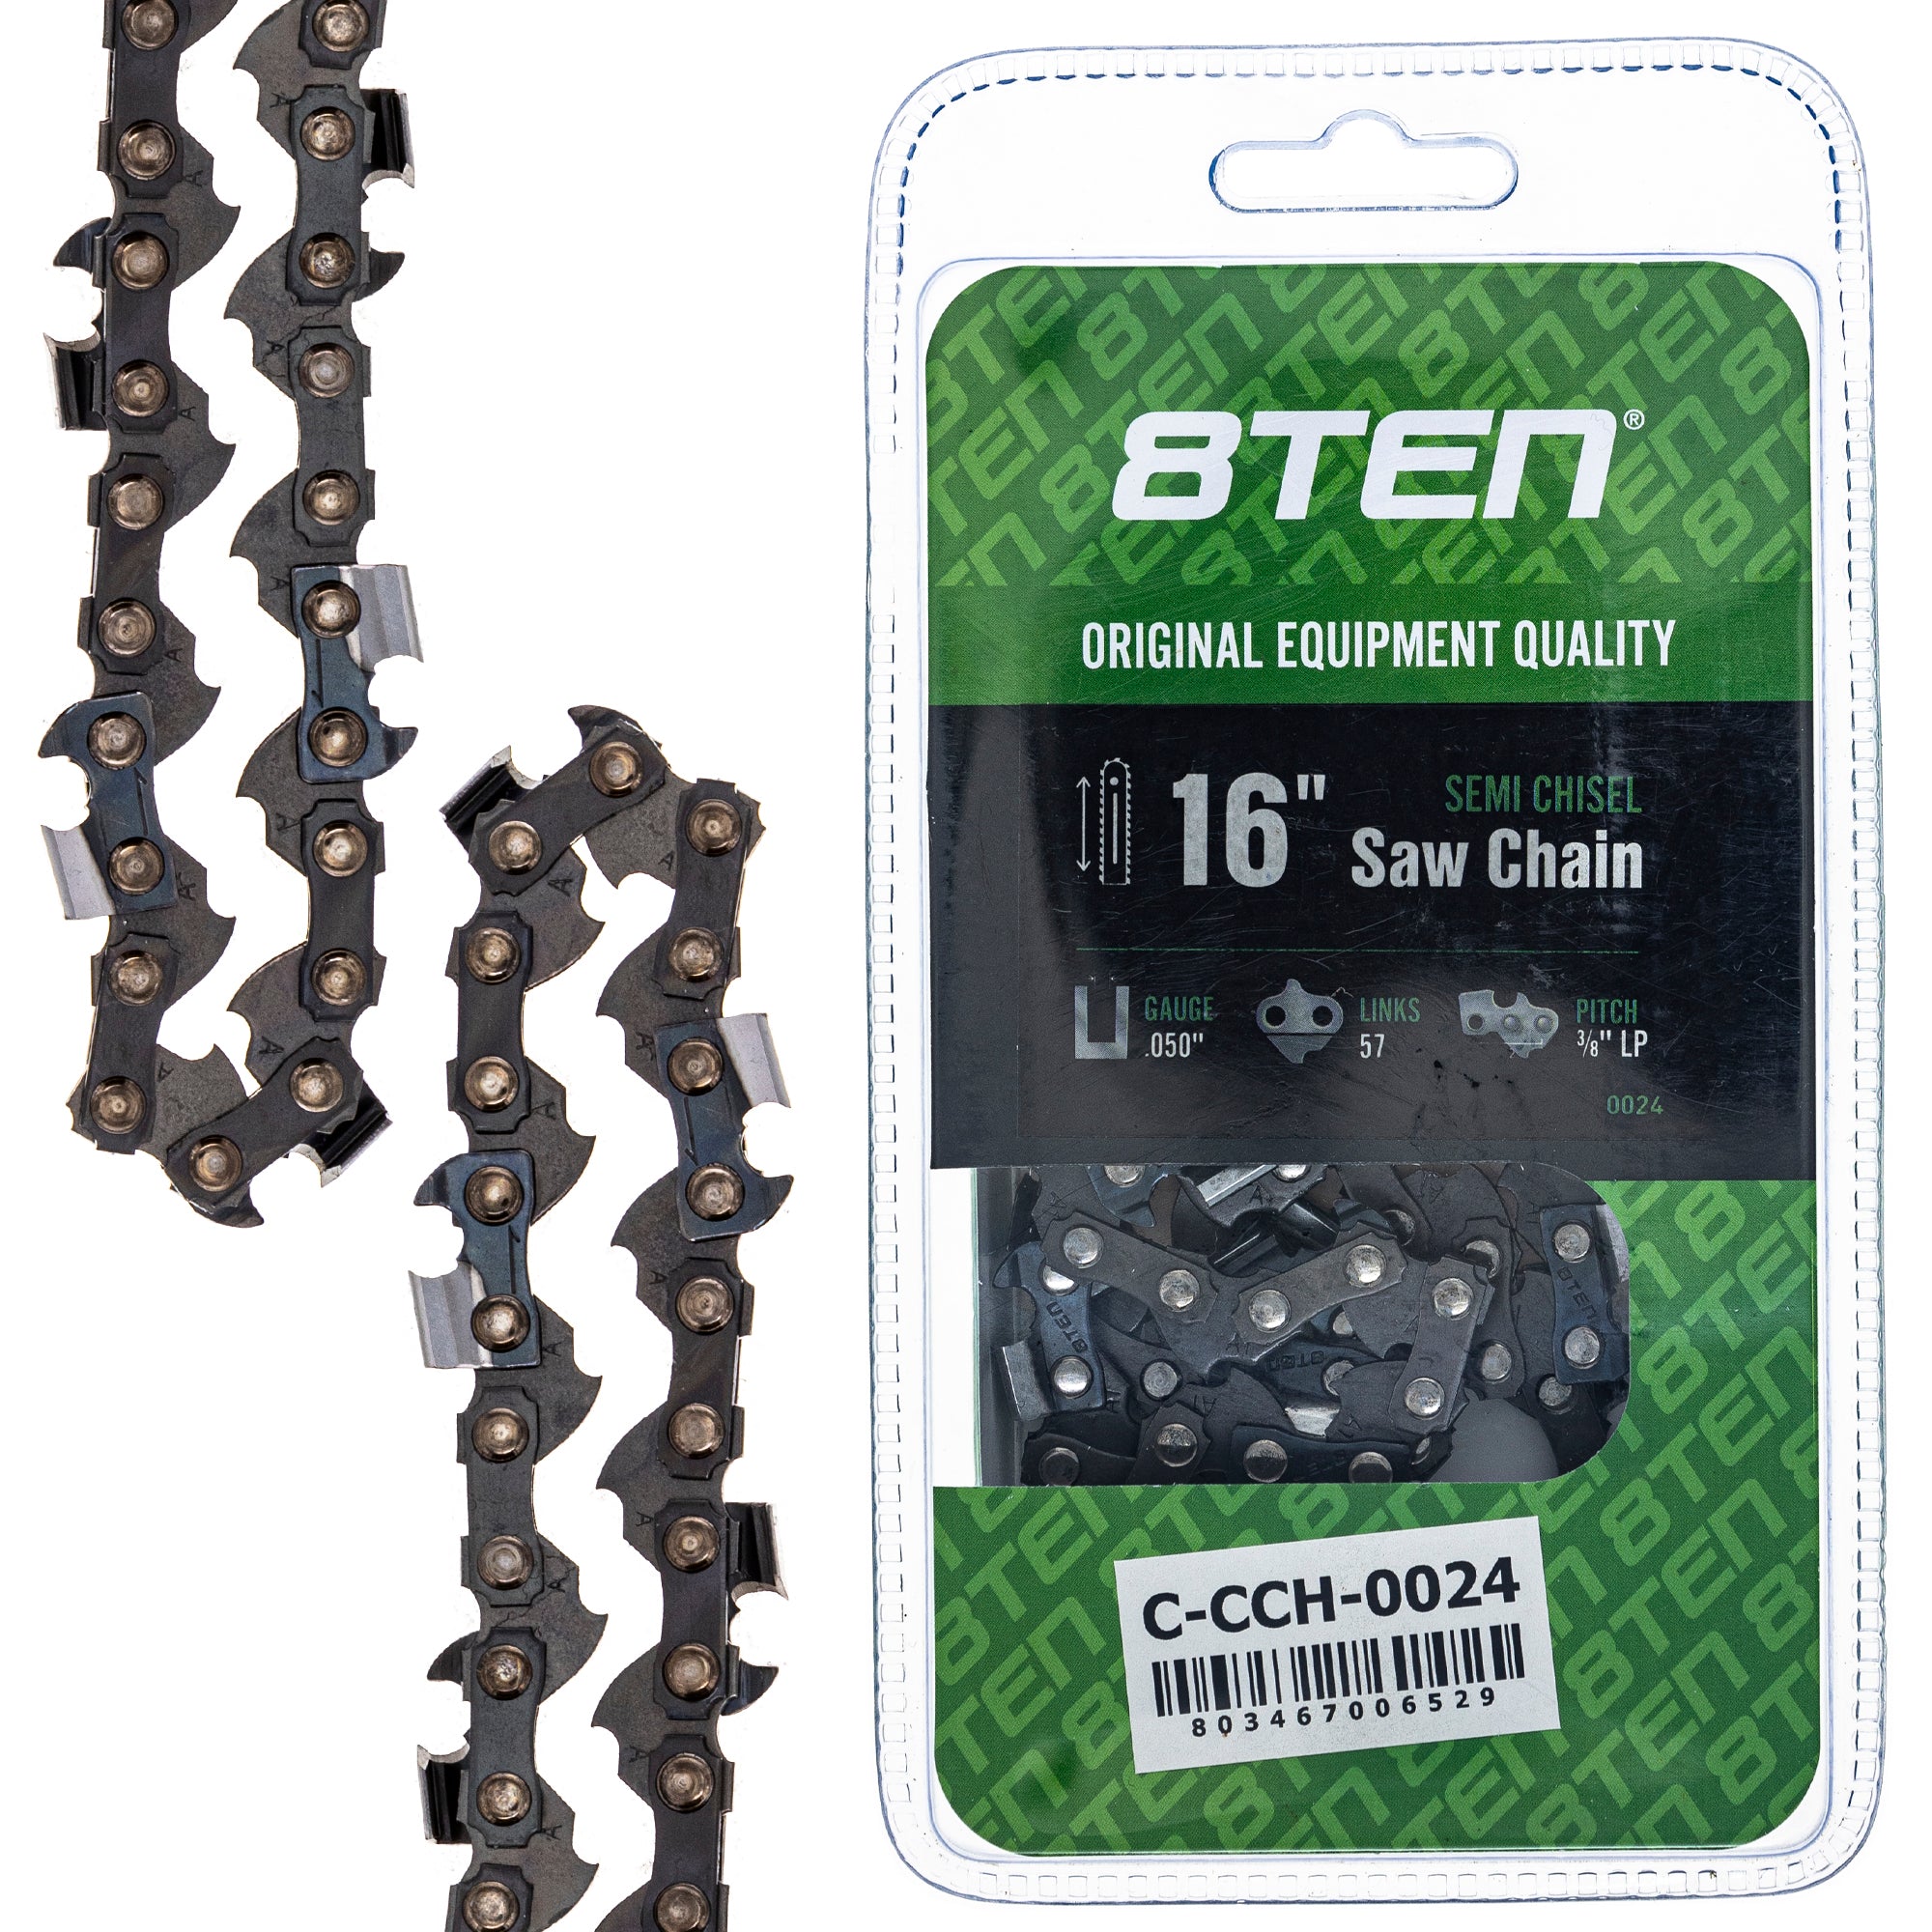 8TEN 810-CCC2246H Chain 6-Pack for zOTHER Windsor Stens Oregon GB